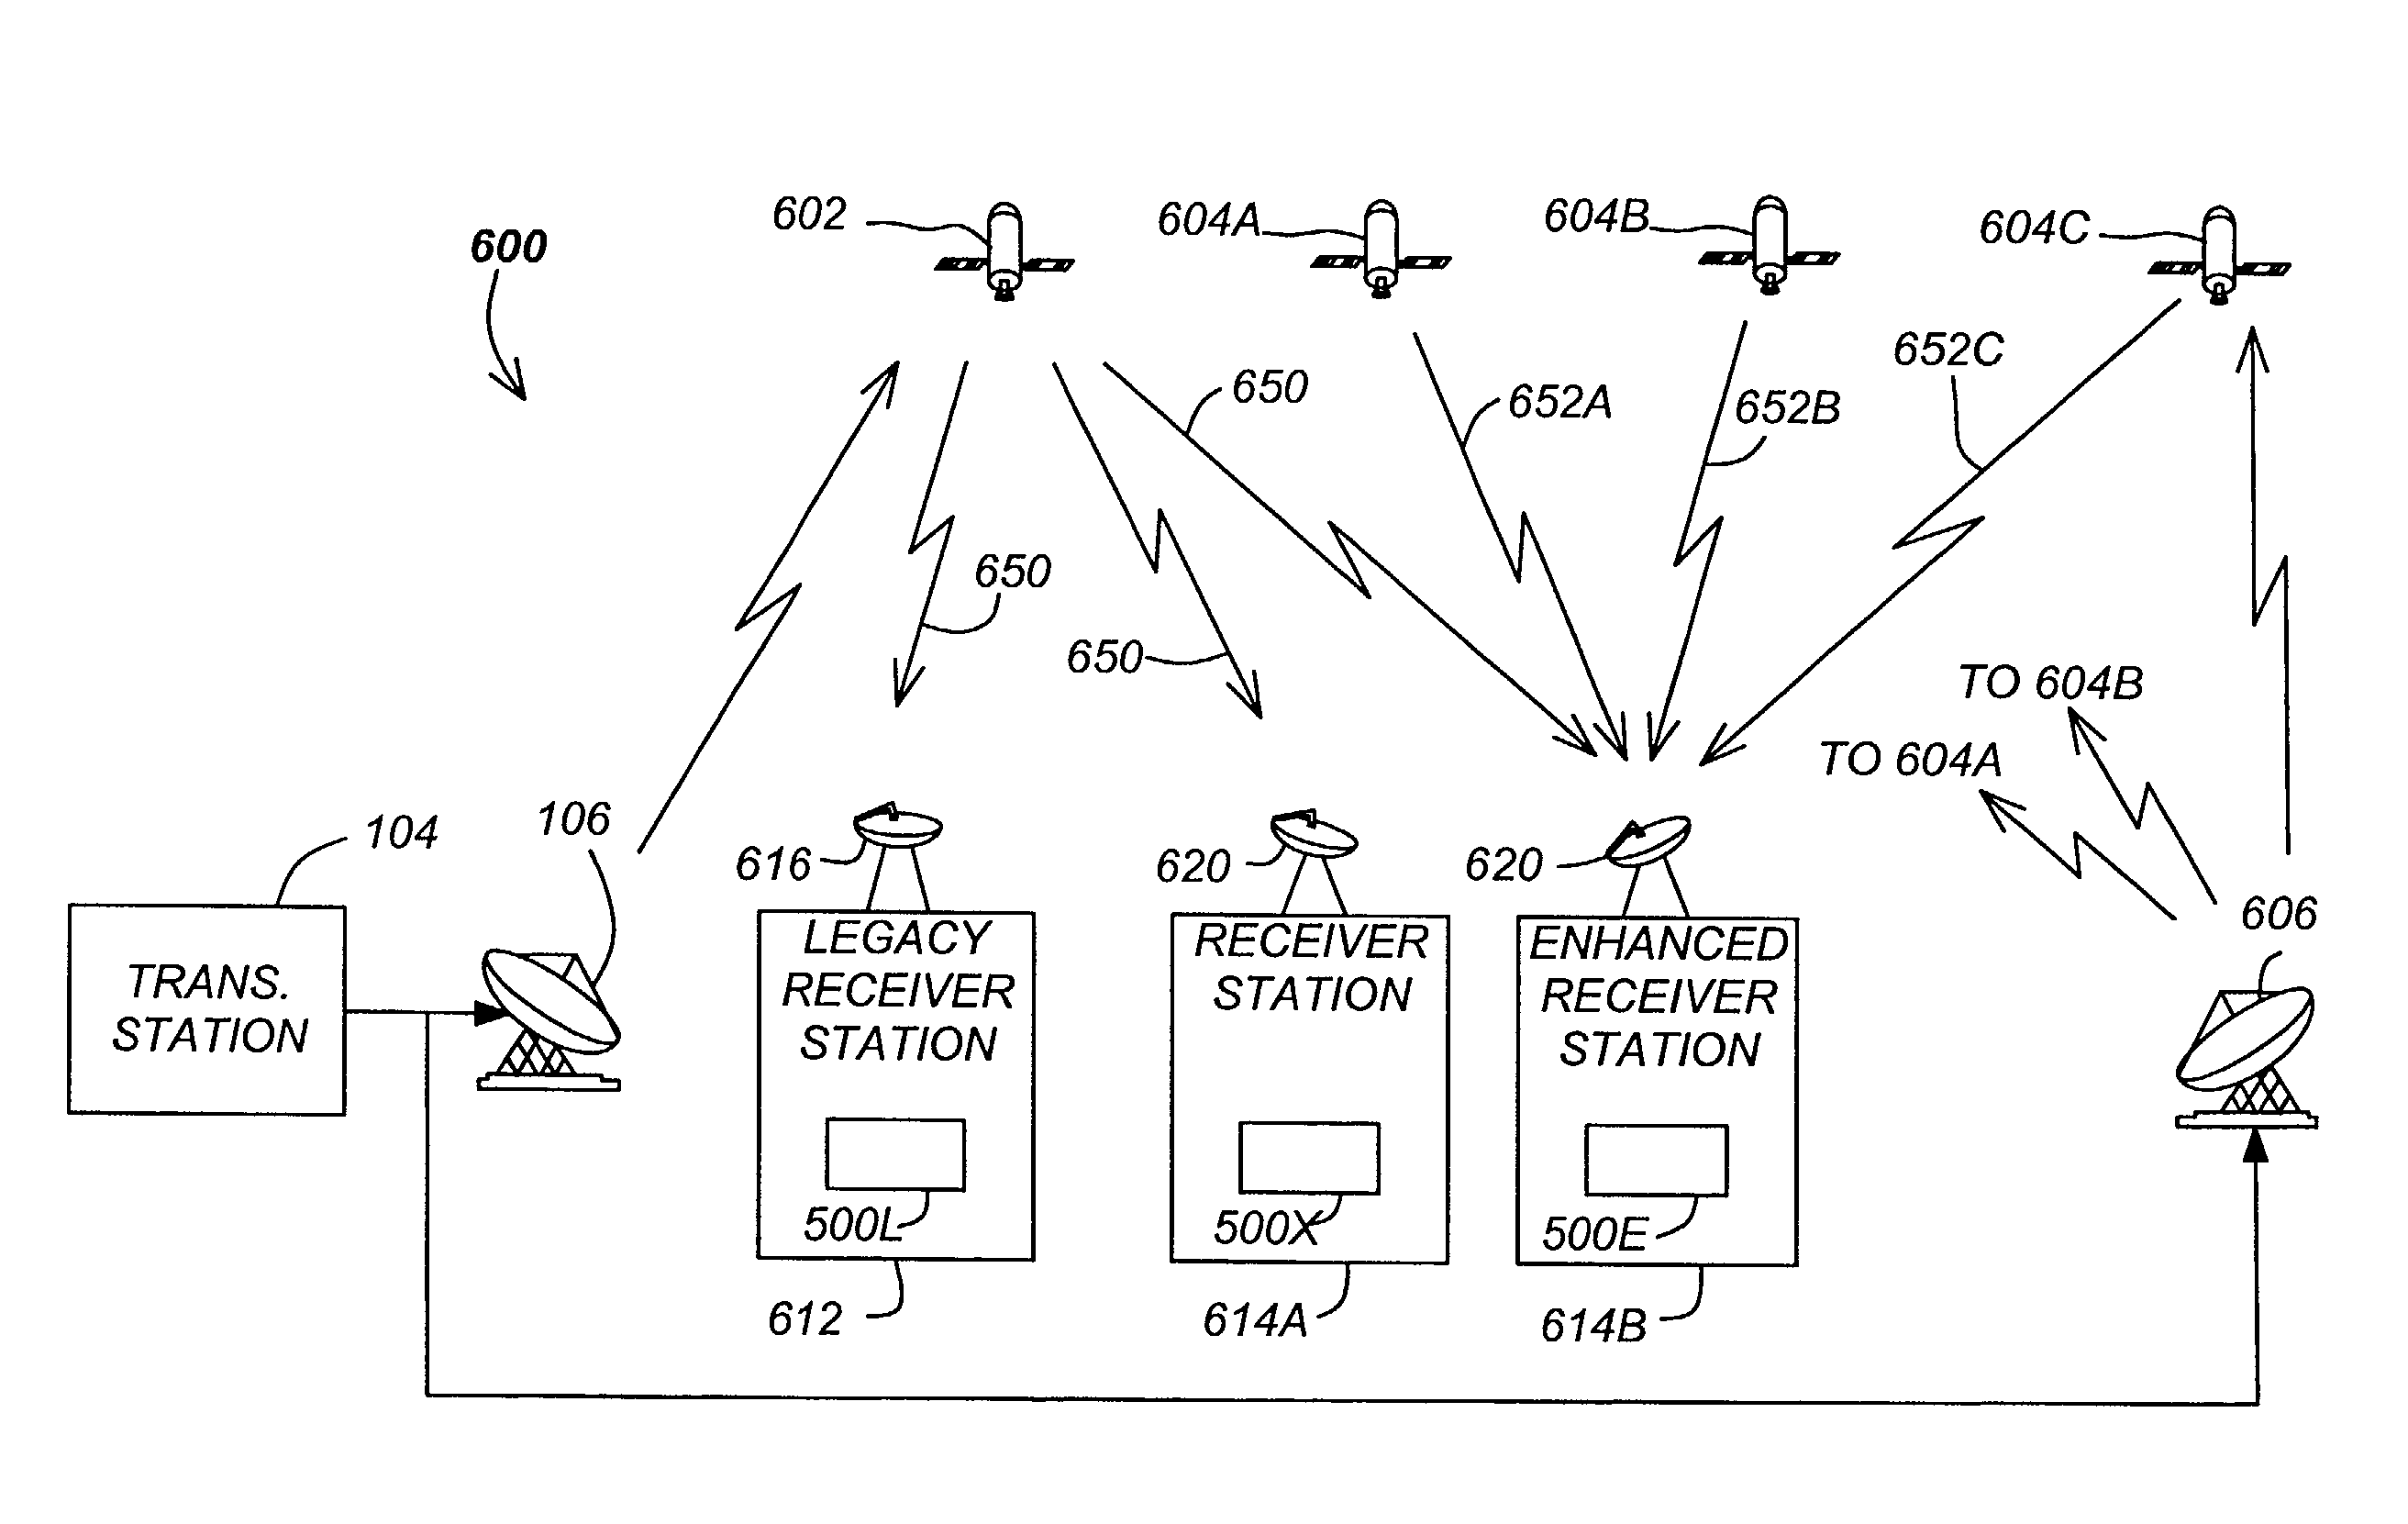 Method and apparatus for providing non-resident program guide information to a media subscriber